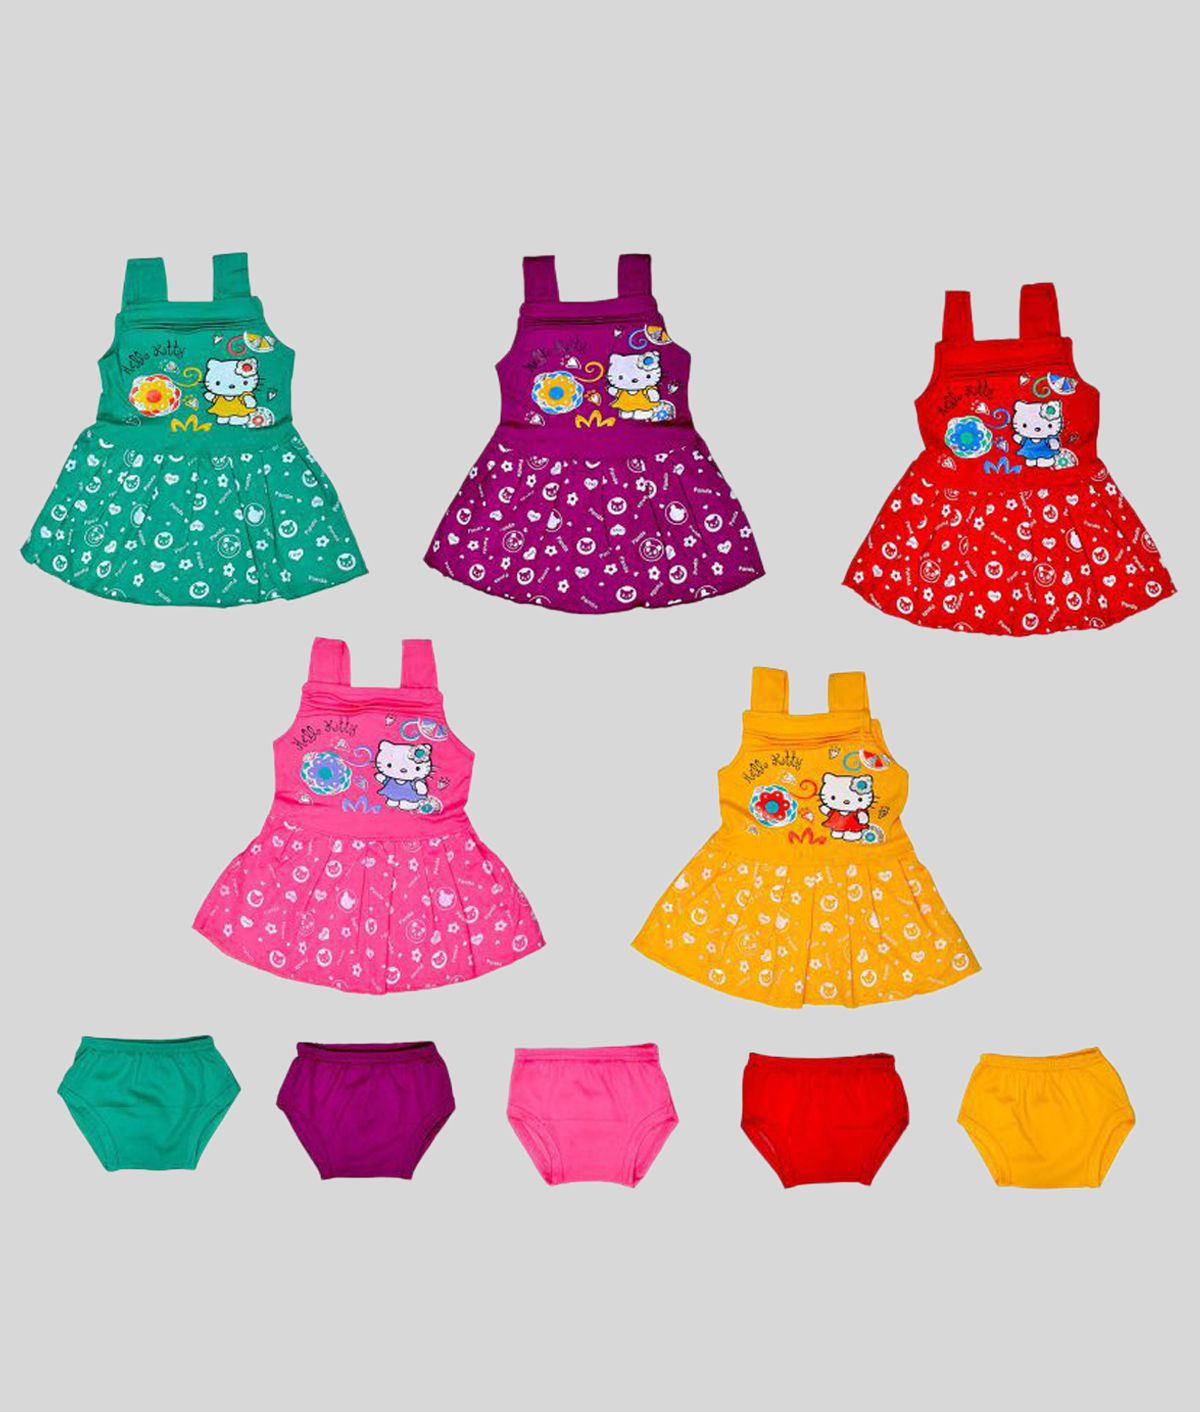     			Sathiyas Green, Purple, Red, Pink and Yellow Baby Girls Dresses Pack of 5